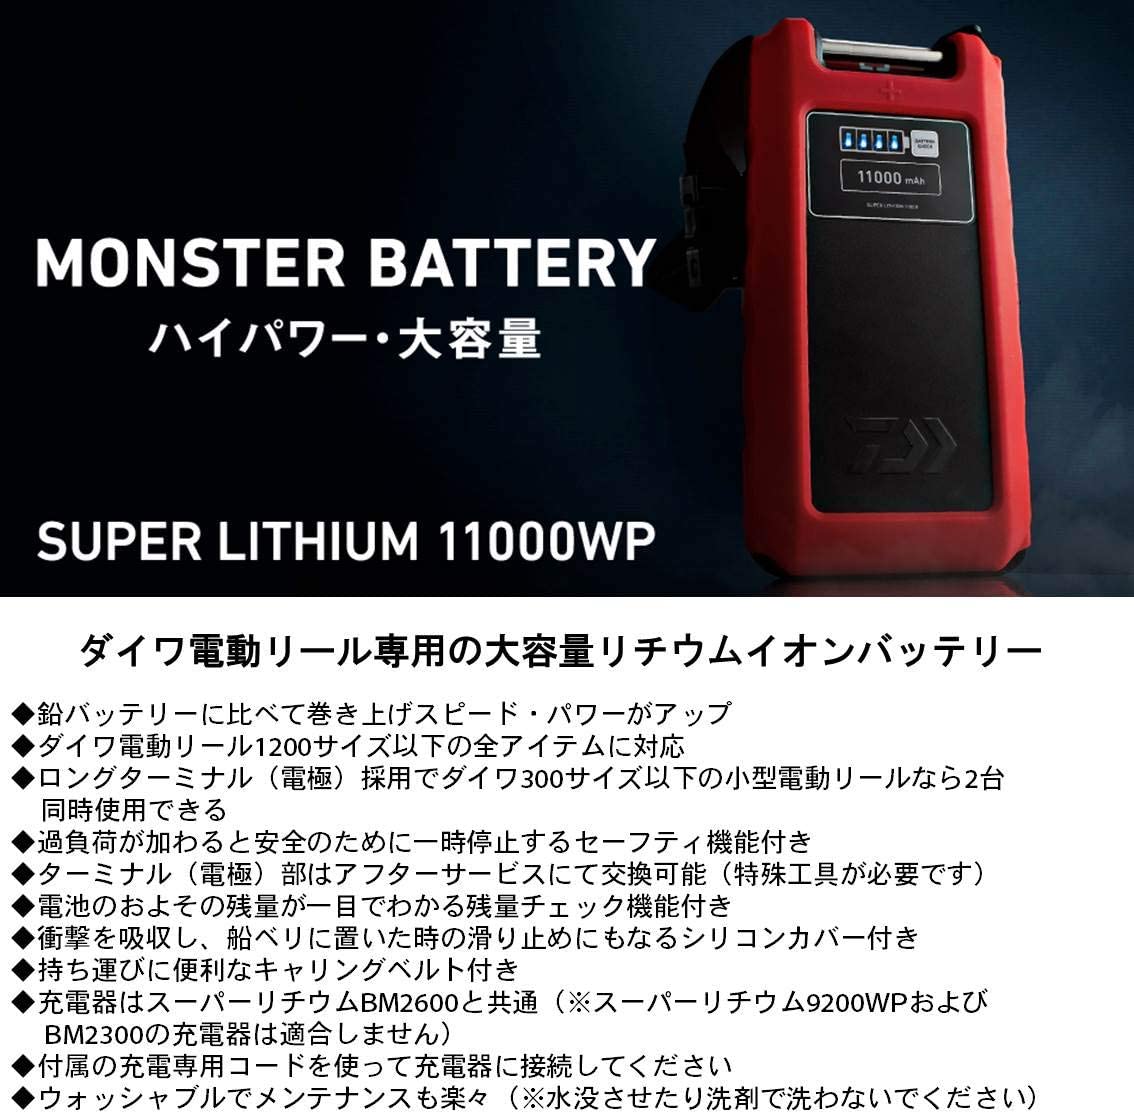 DAIWA Super Lithium 11000WP-C with Charger - Discovery Japan Mall